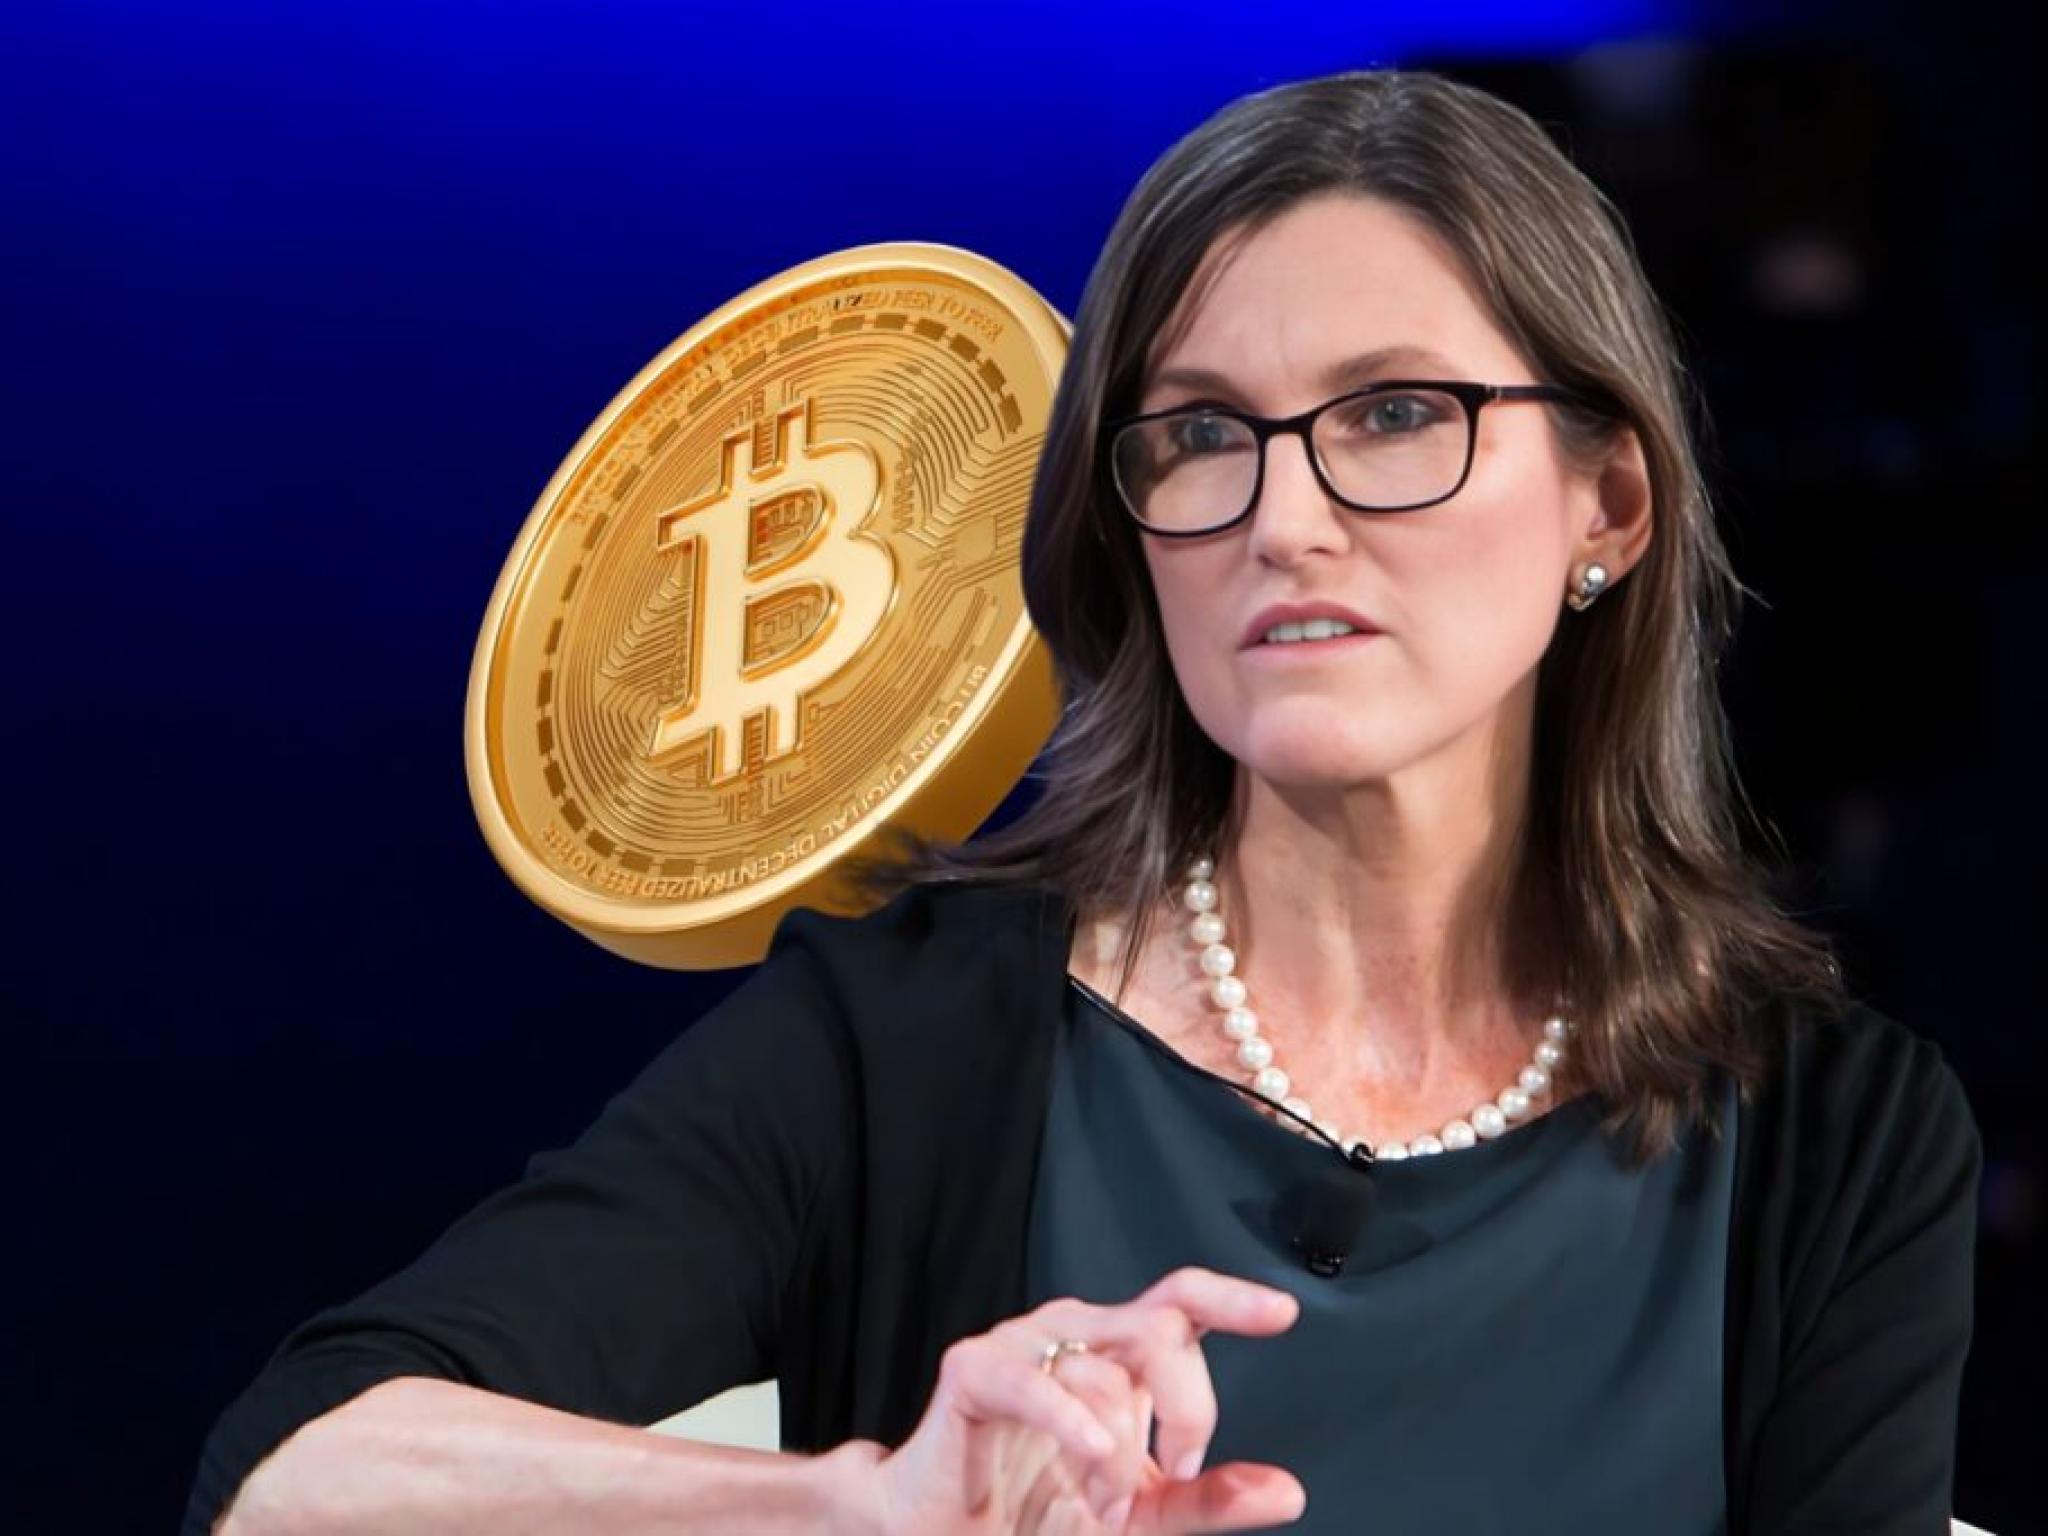  cathie-woods-ark-bitcoin-etf-posts-record-87m-outflow-as-crypto-market-faces-correction 